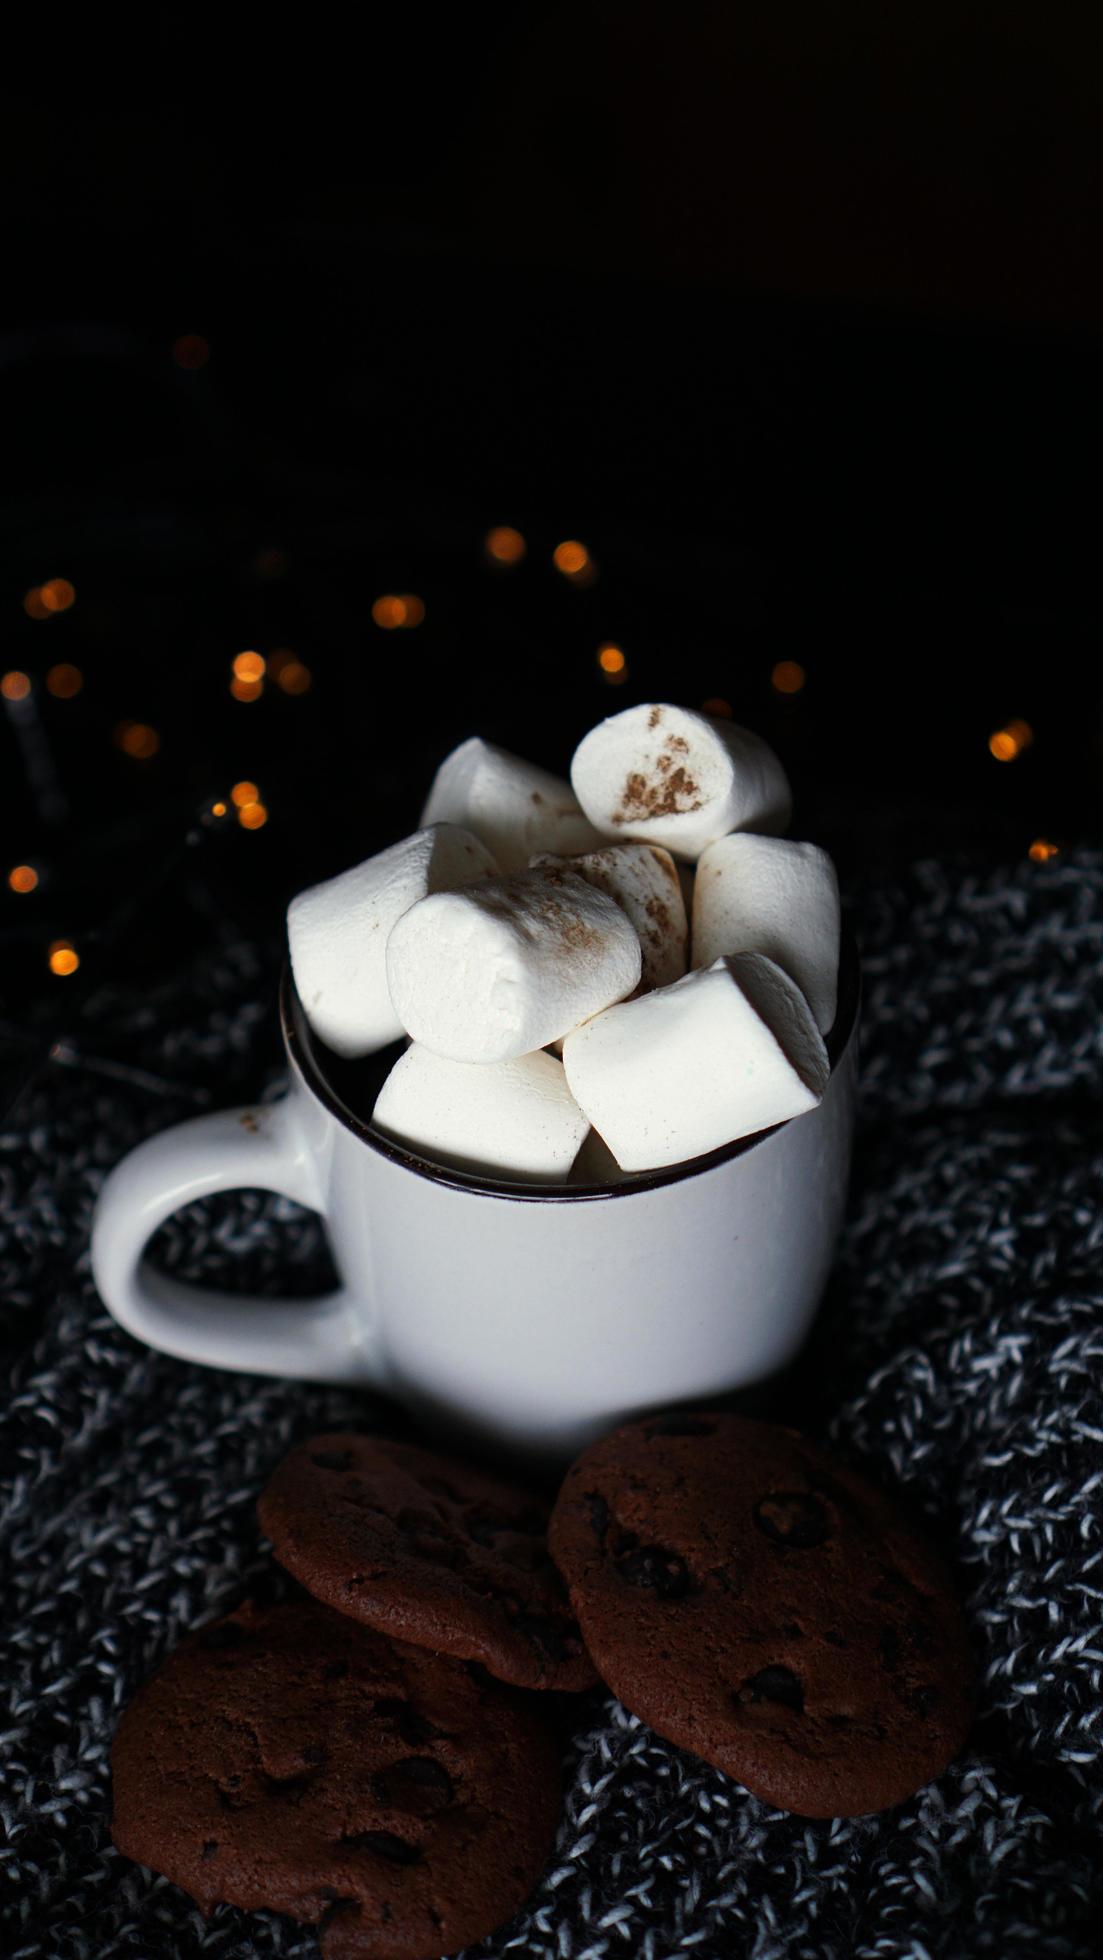 A mug of hot chocolate with marshmallows and chocolate chip cookies - Marshmallows